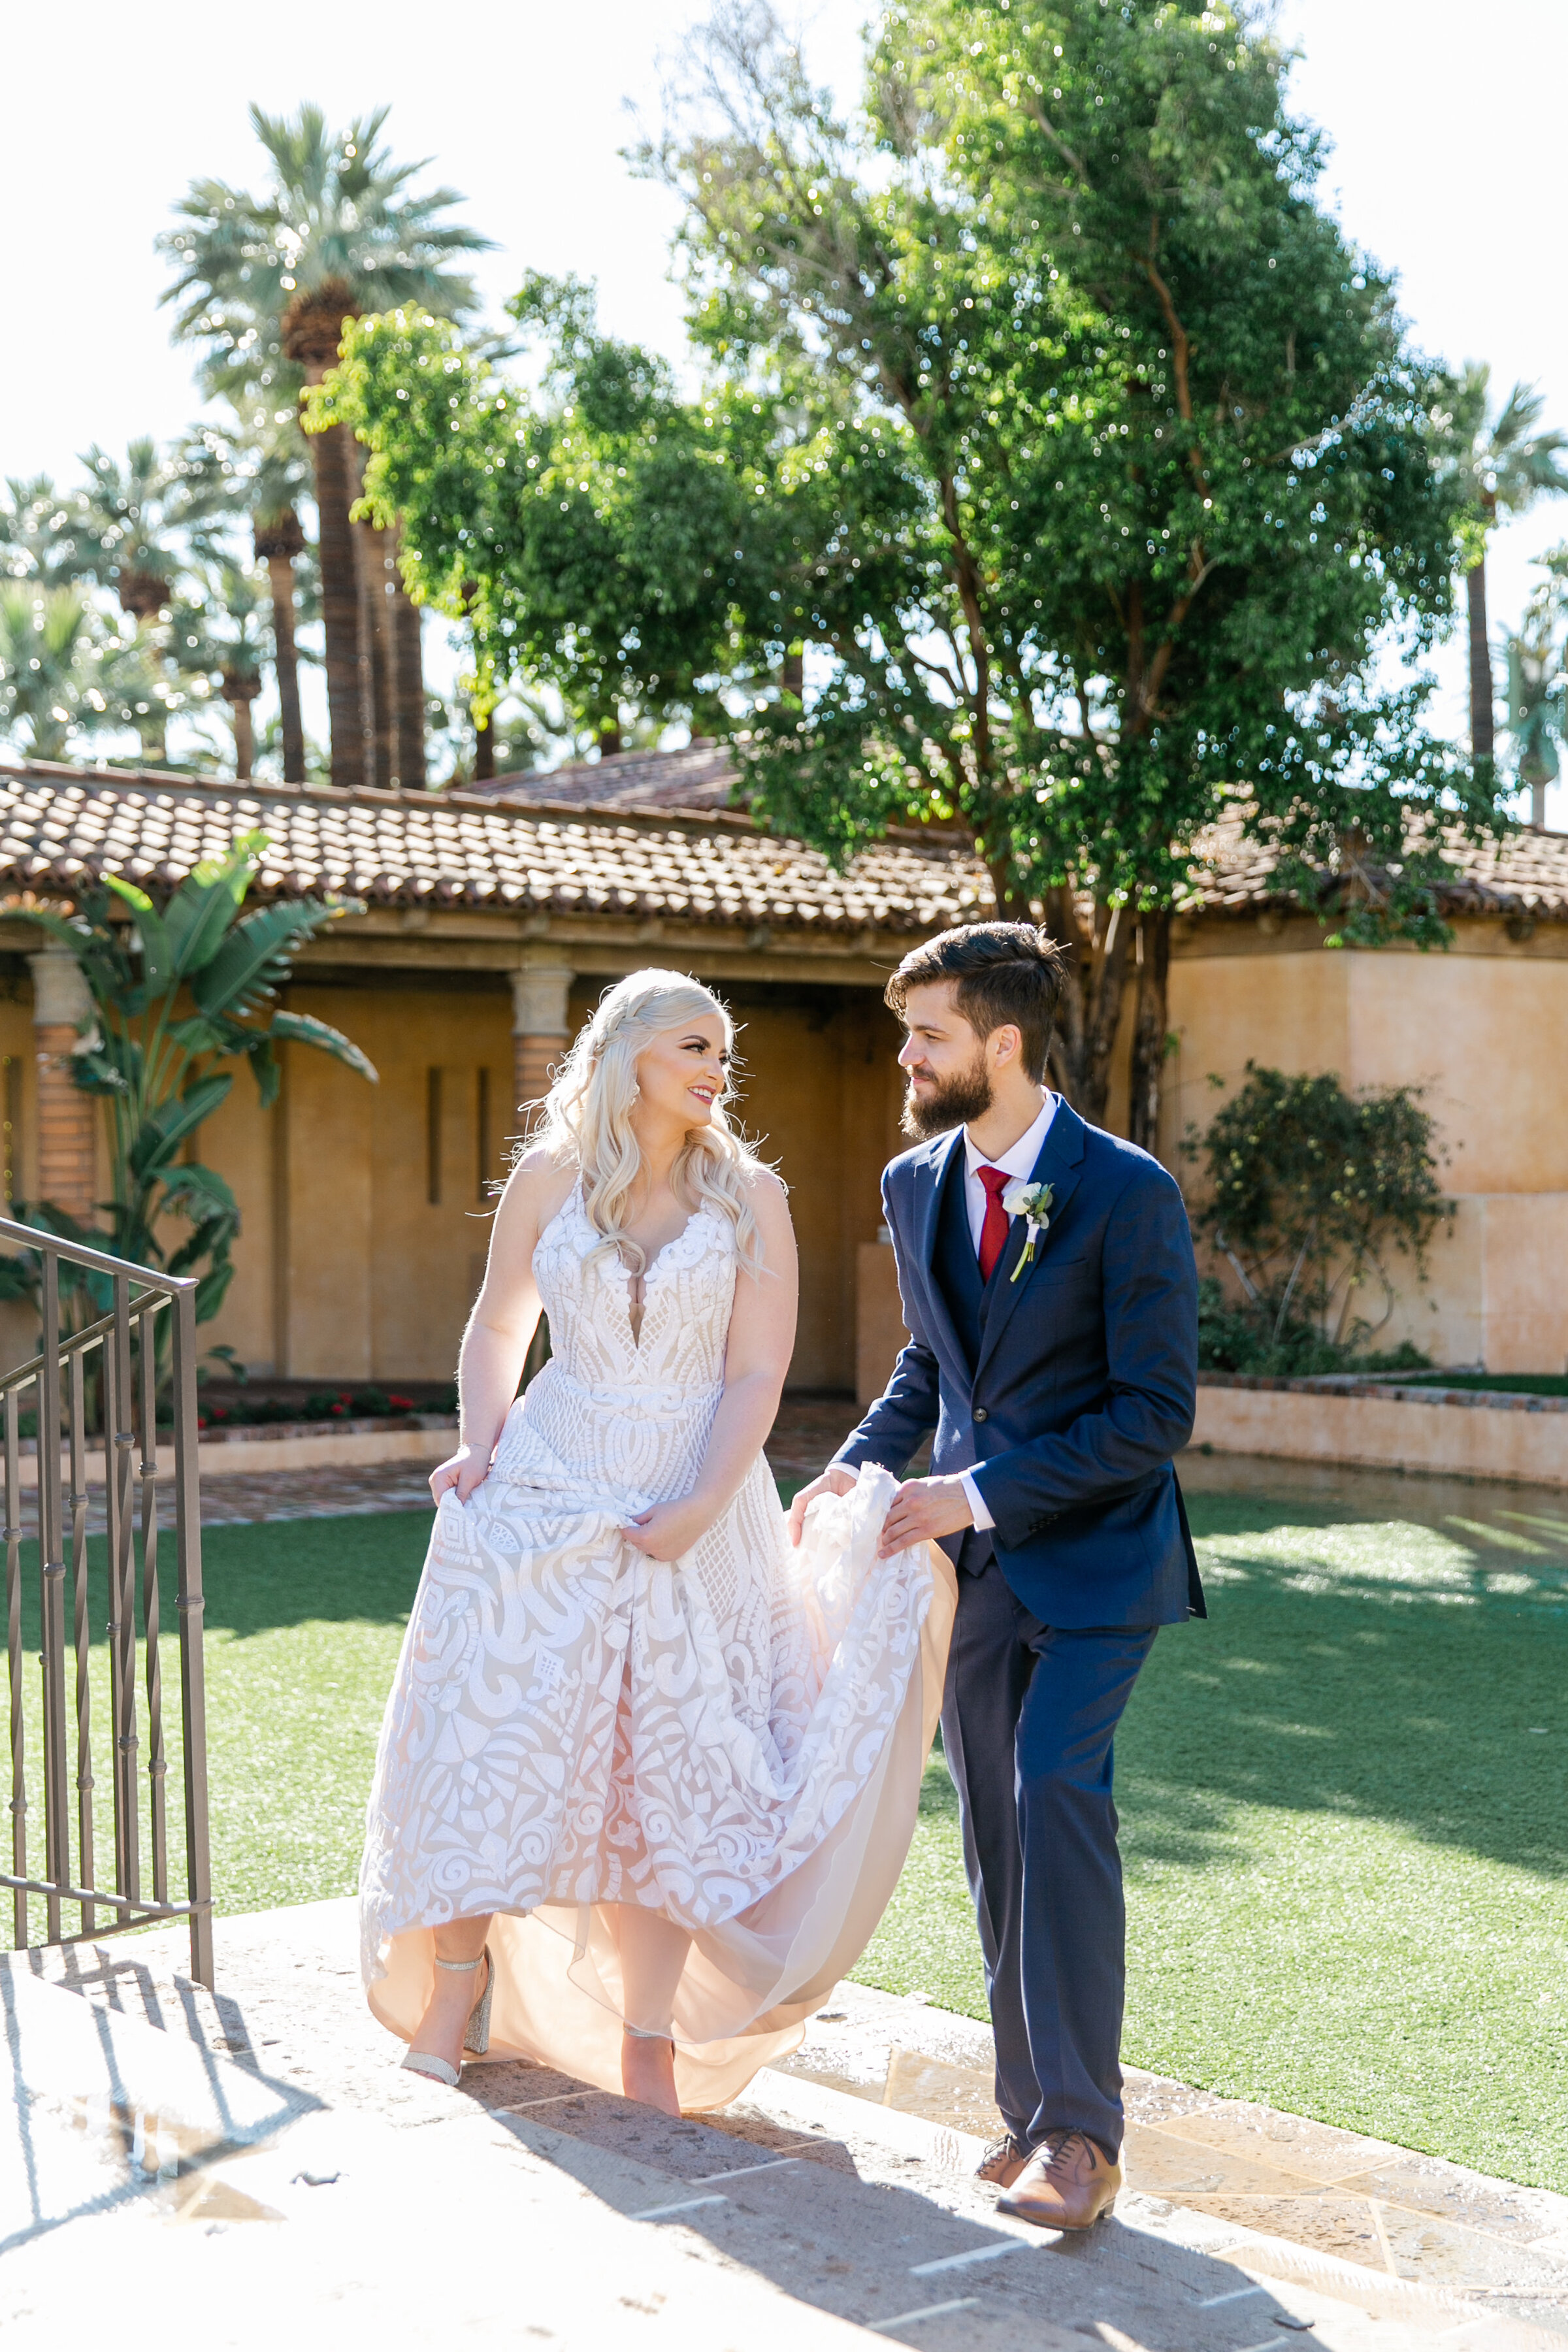 Karlie Colleen Photography - The Royal Palms Wedding - Some Like It Classic - Alex & Sam-174